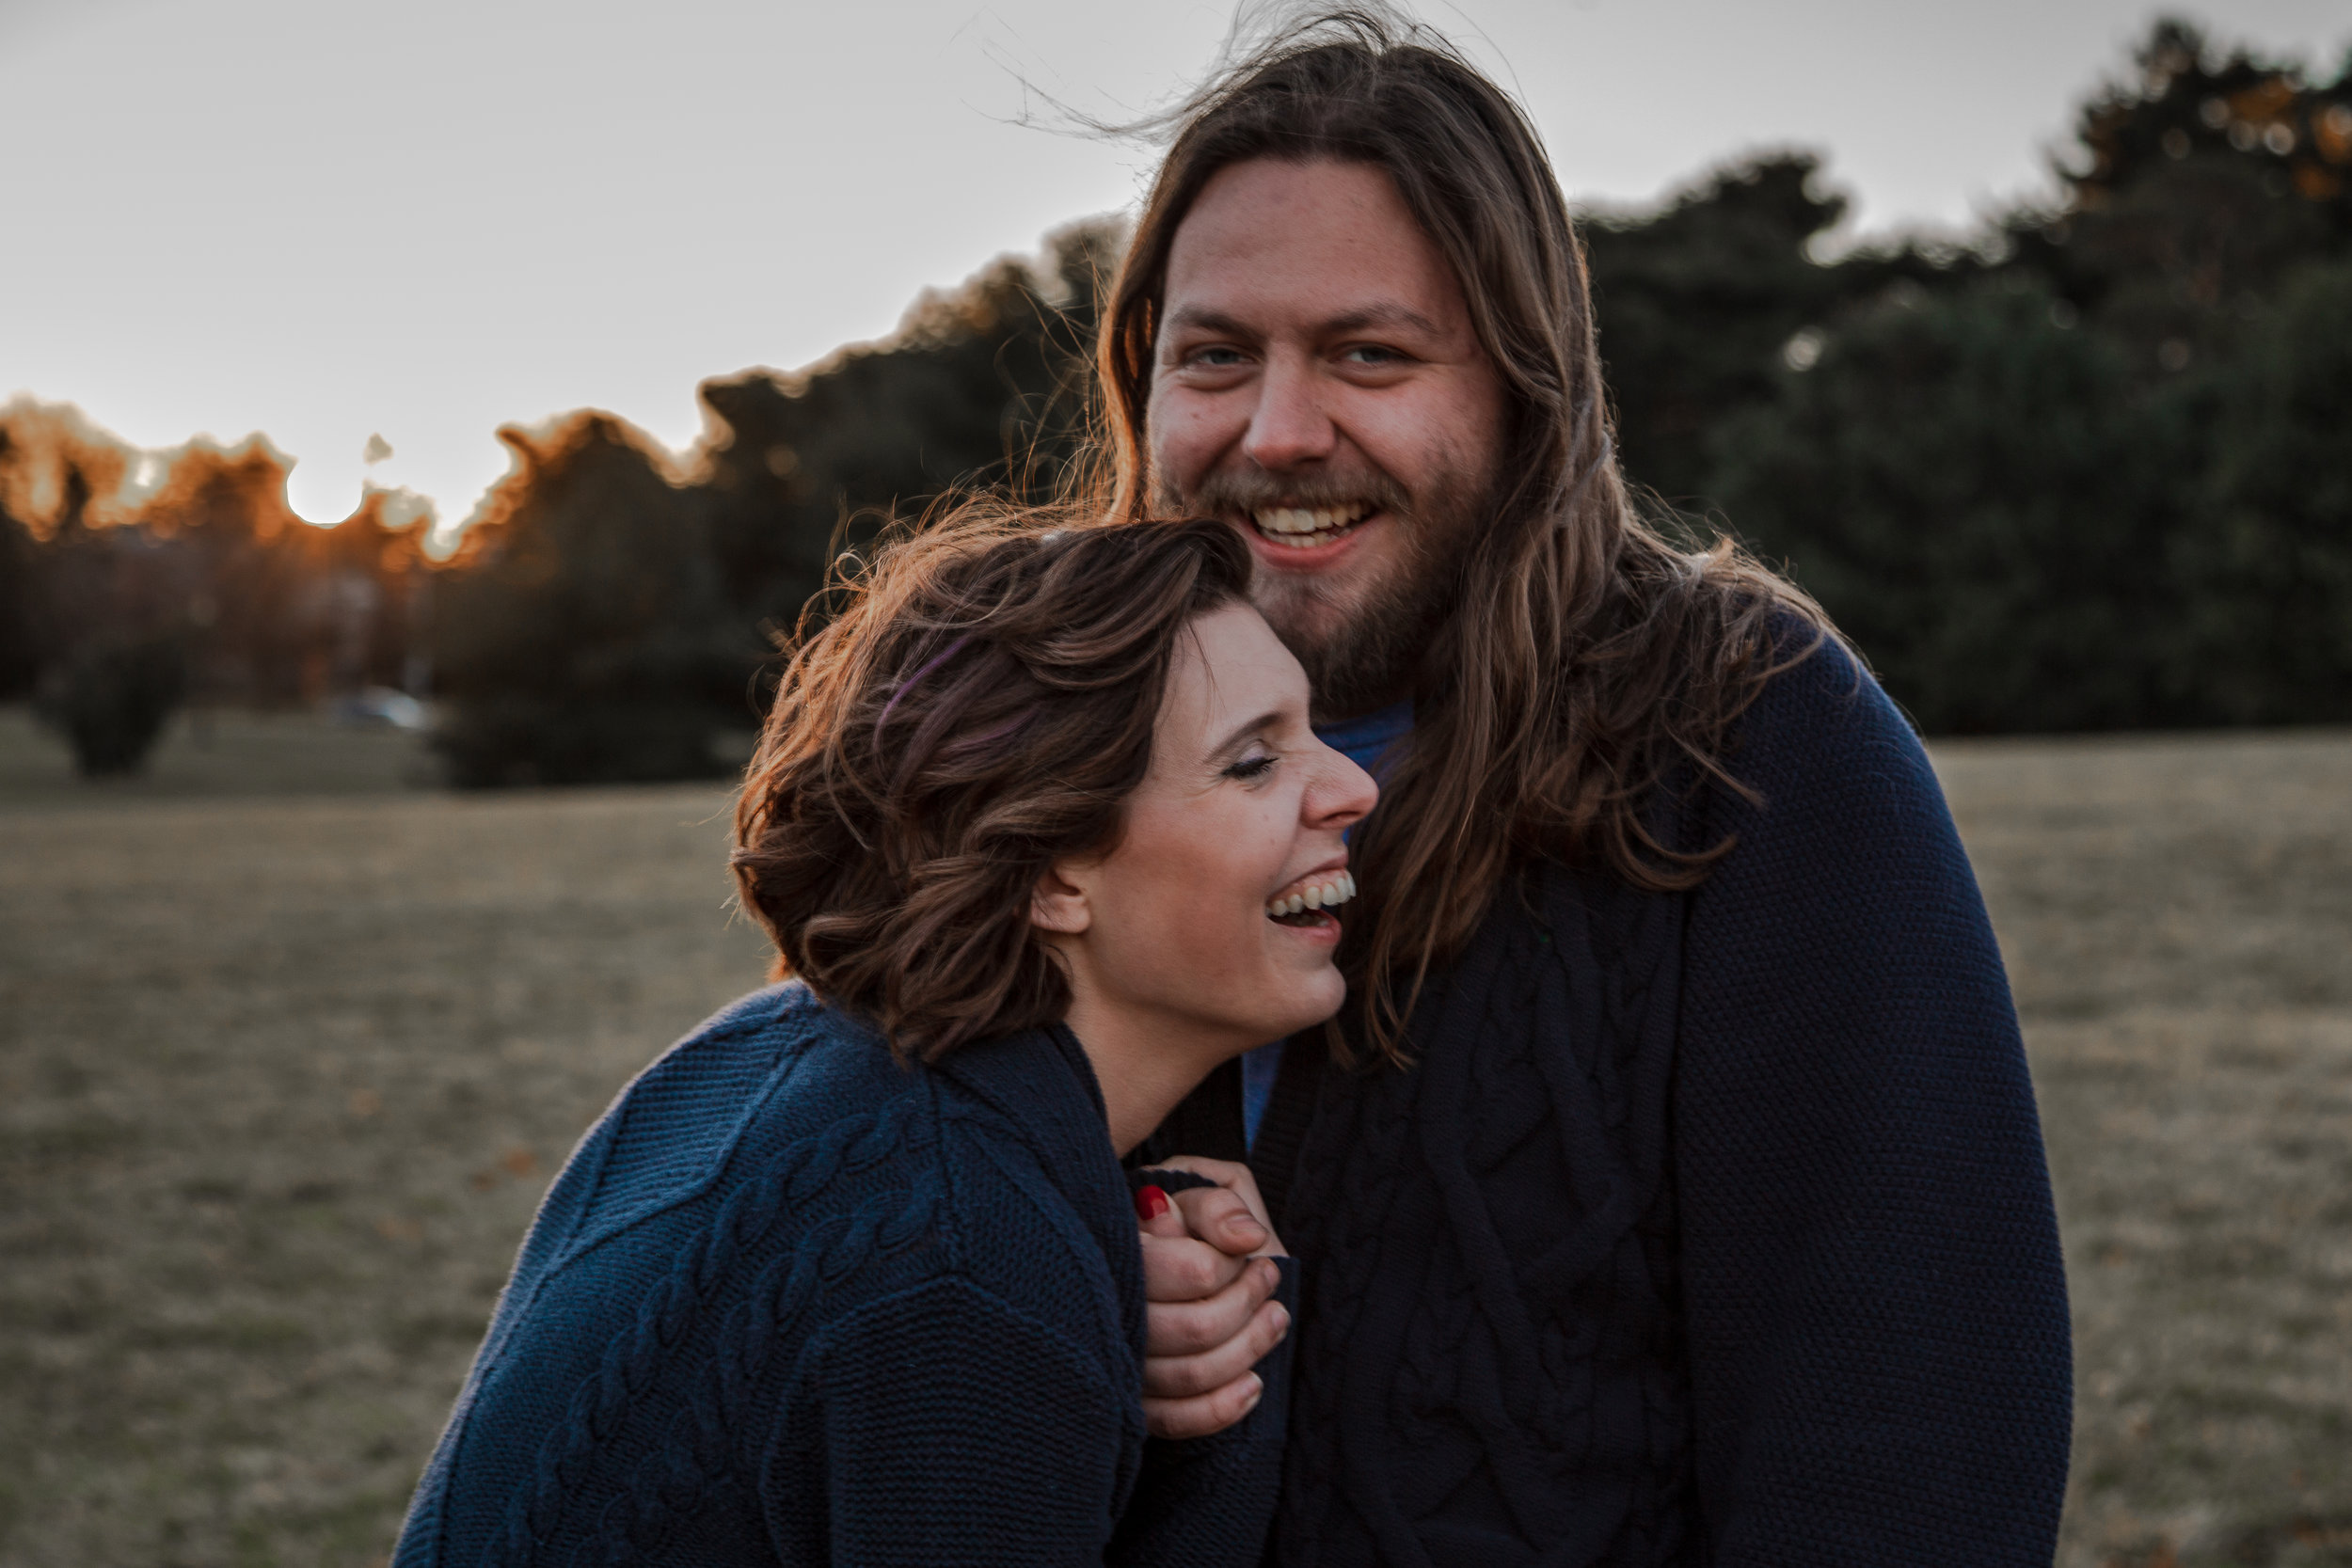 Tom + Kailey Engagements (17 of 24).jpg